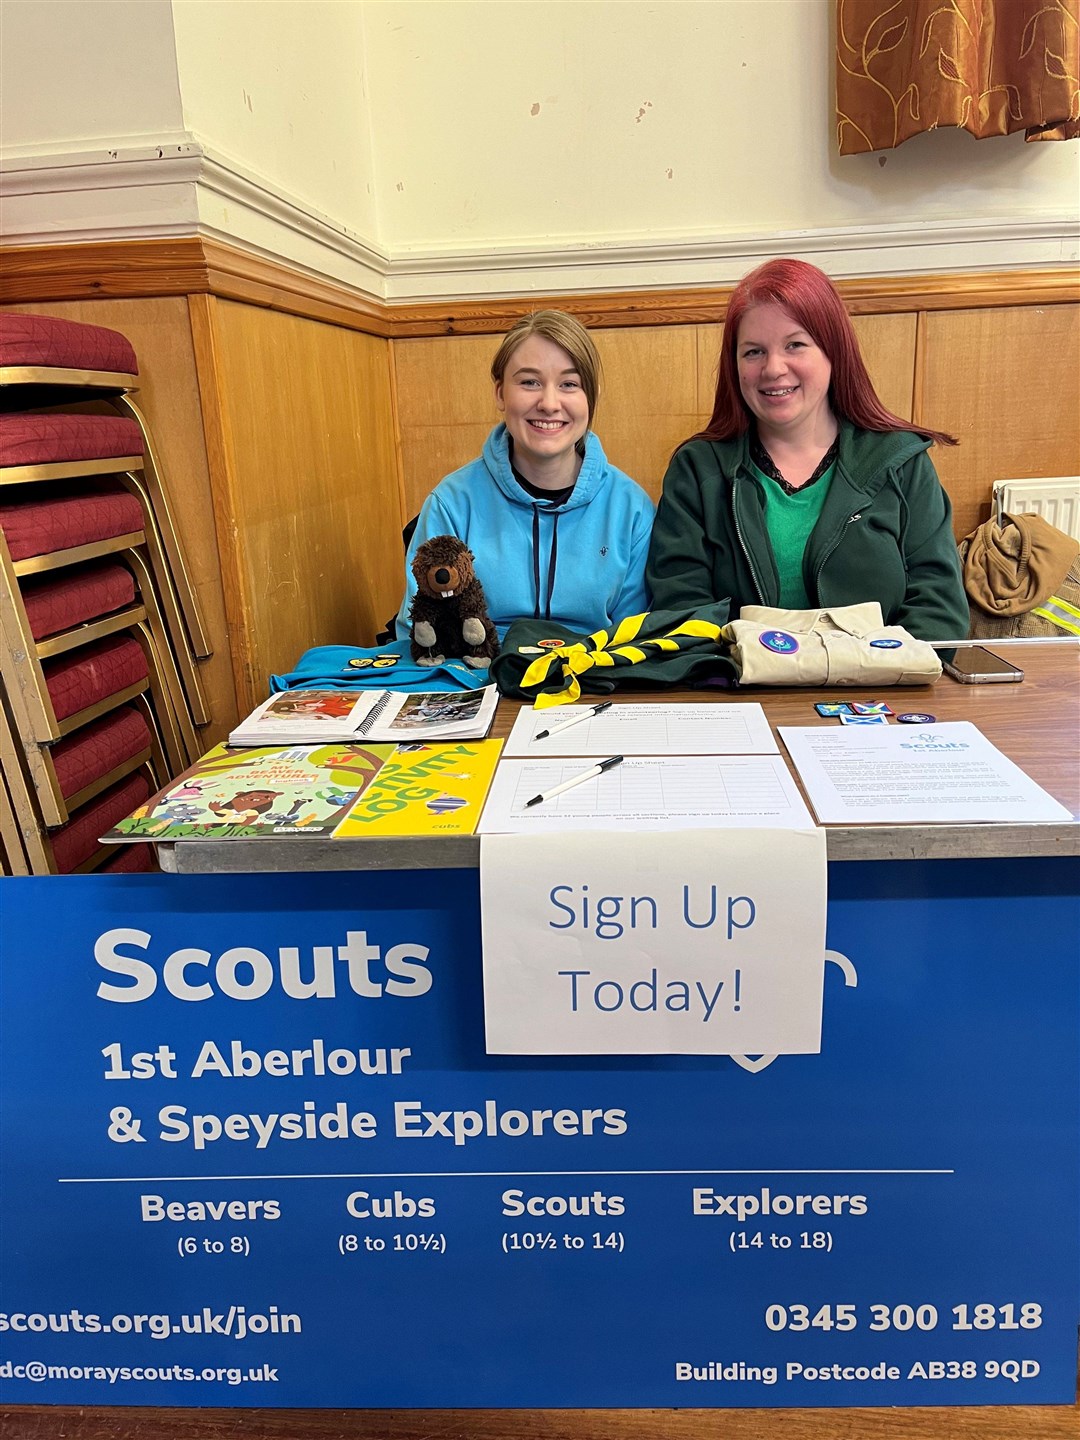 First Aberlour Scouts & Speyside Explorers stall.